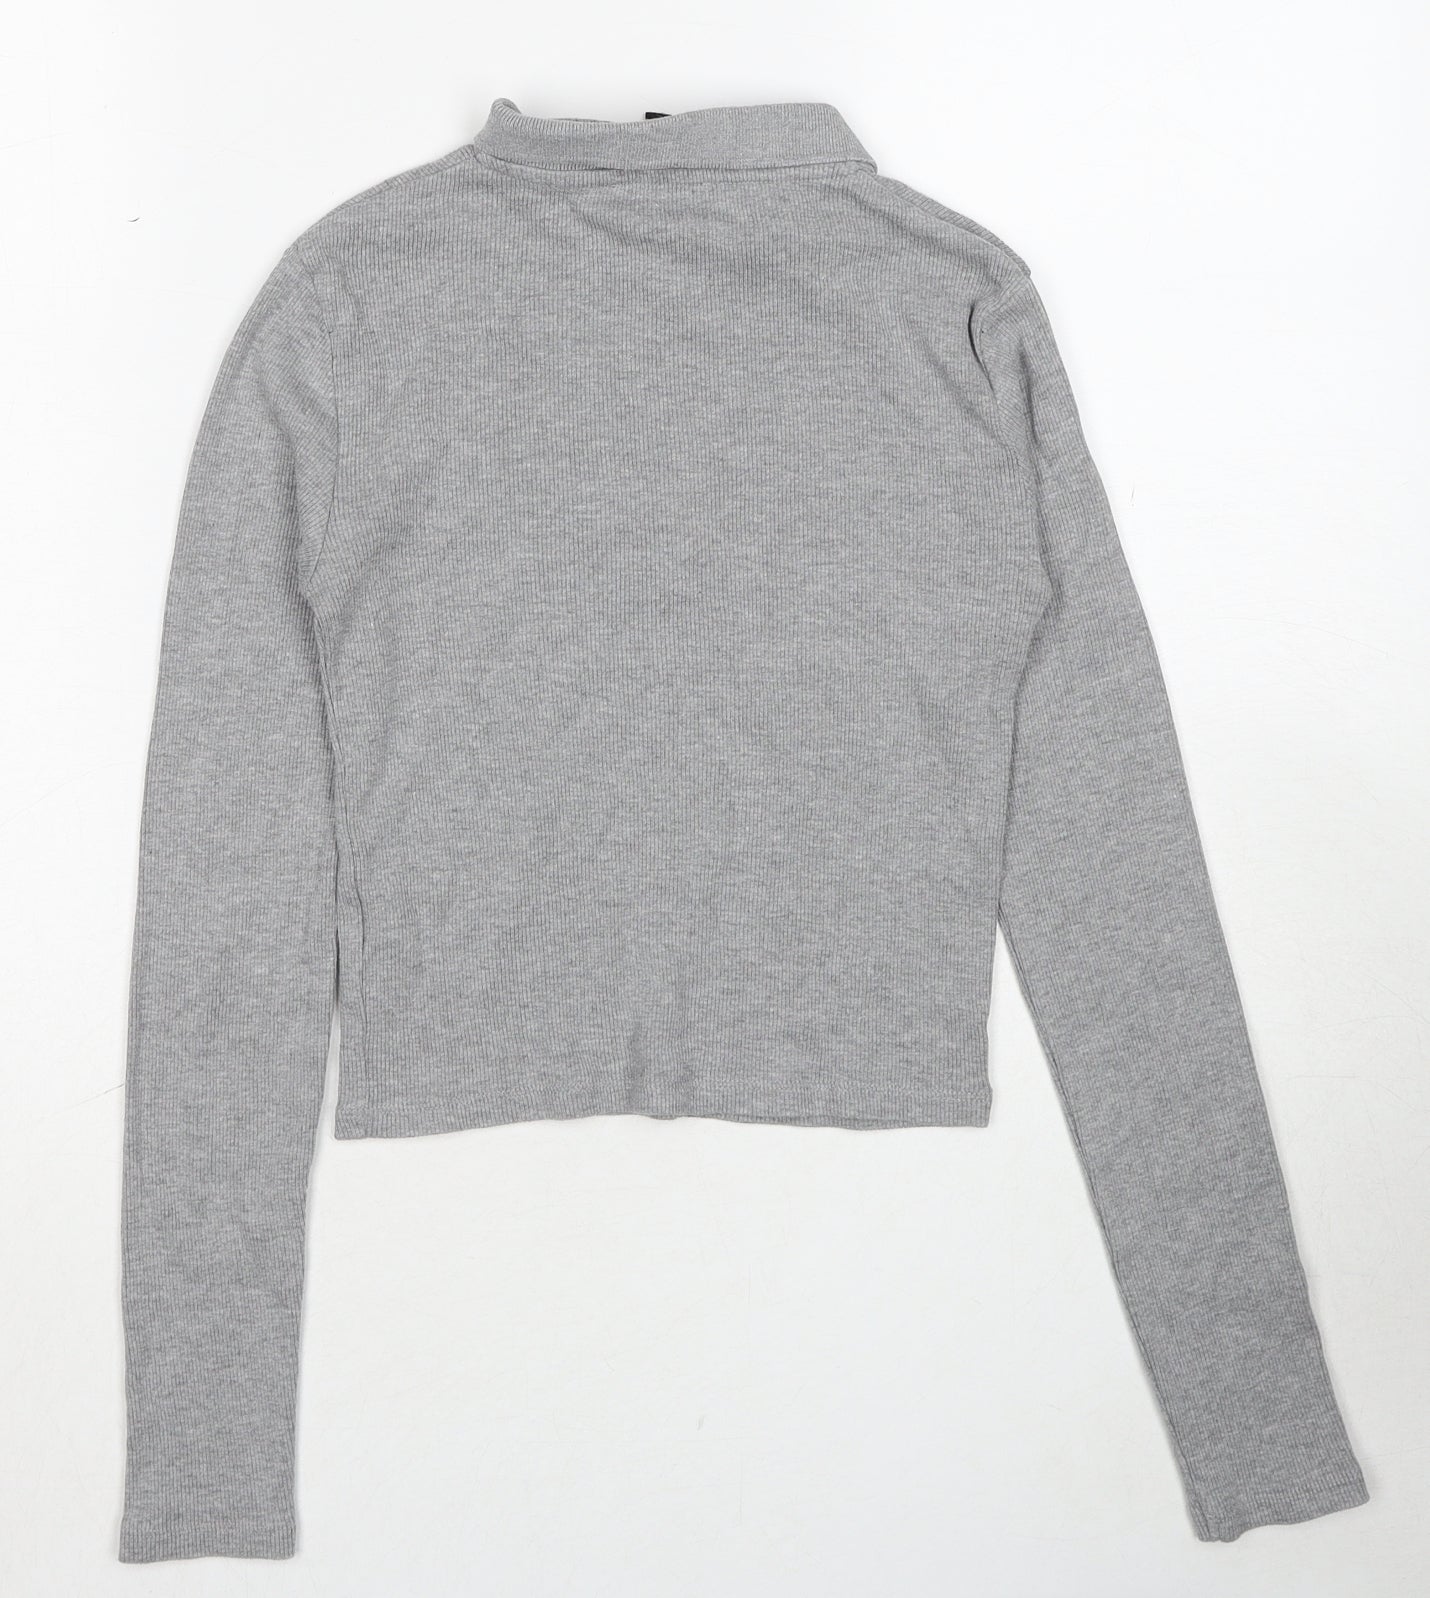 Topshop Womens Grey Collared Cotton Pullover Jumper Size 8